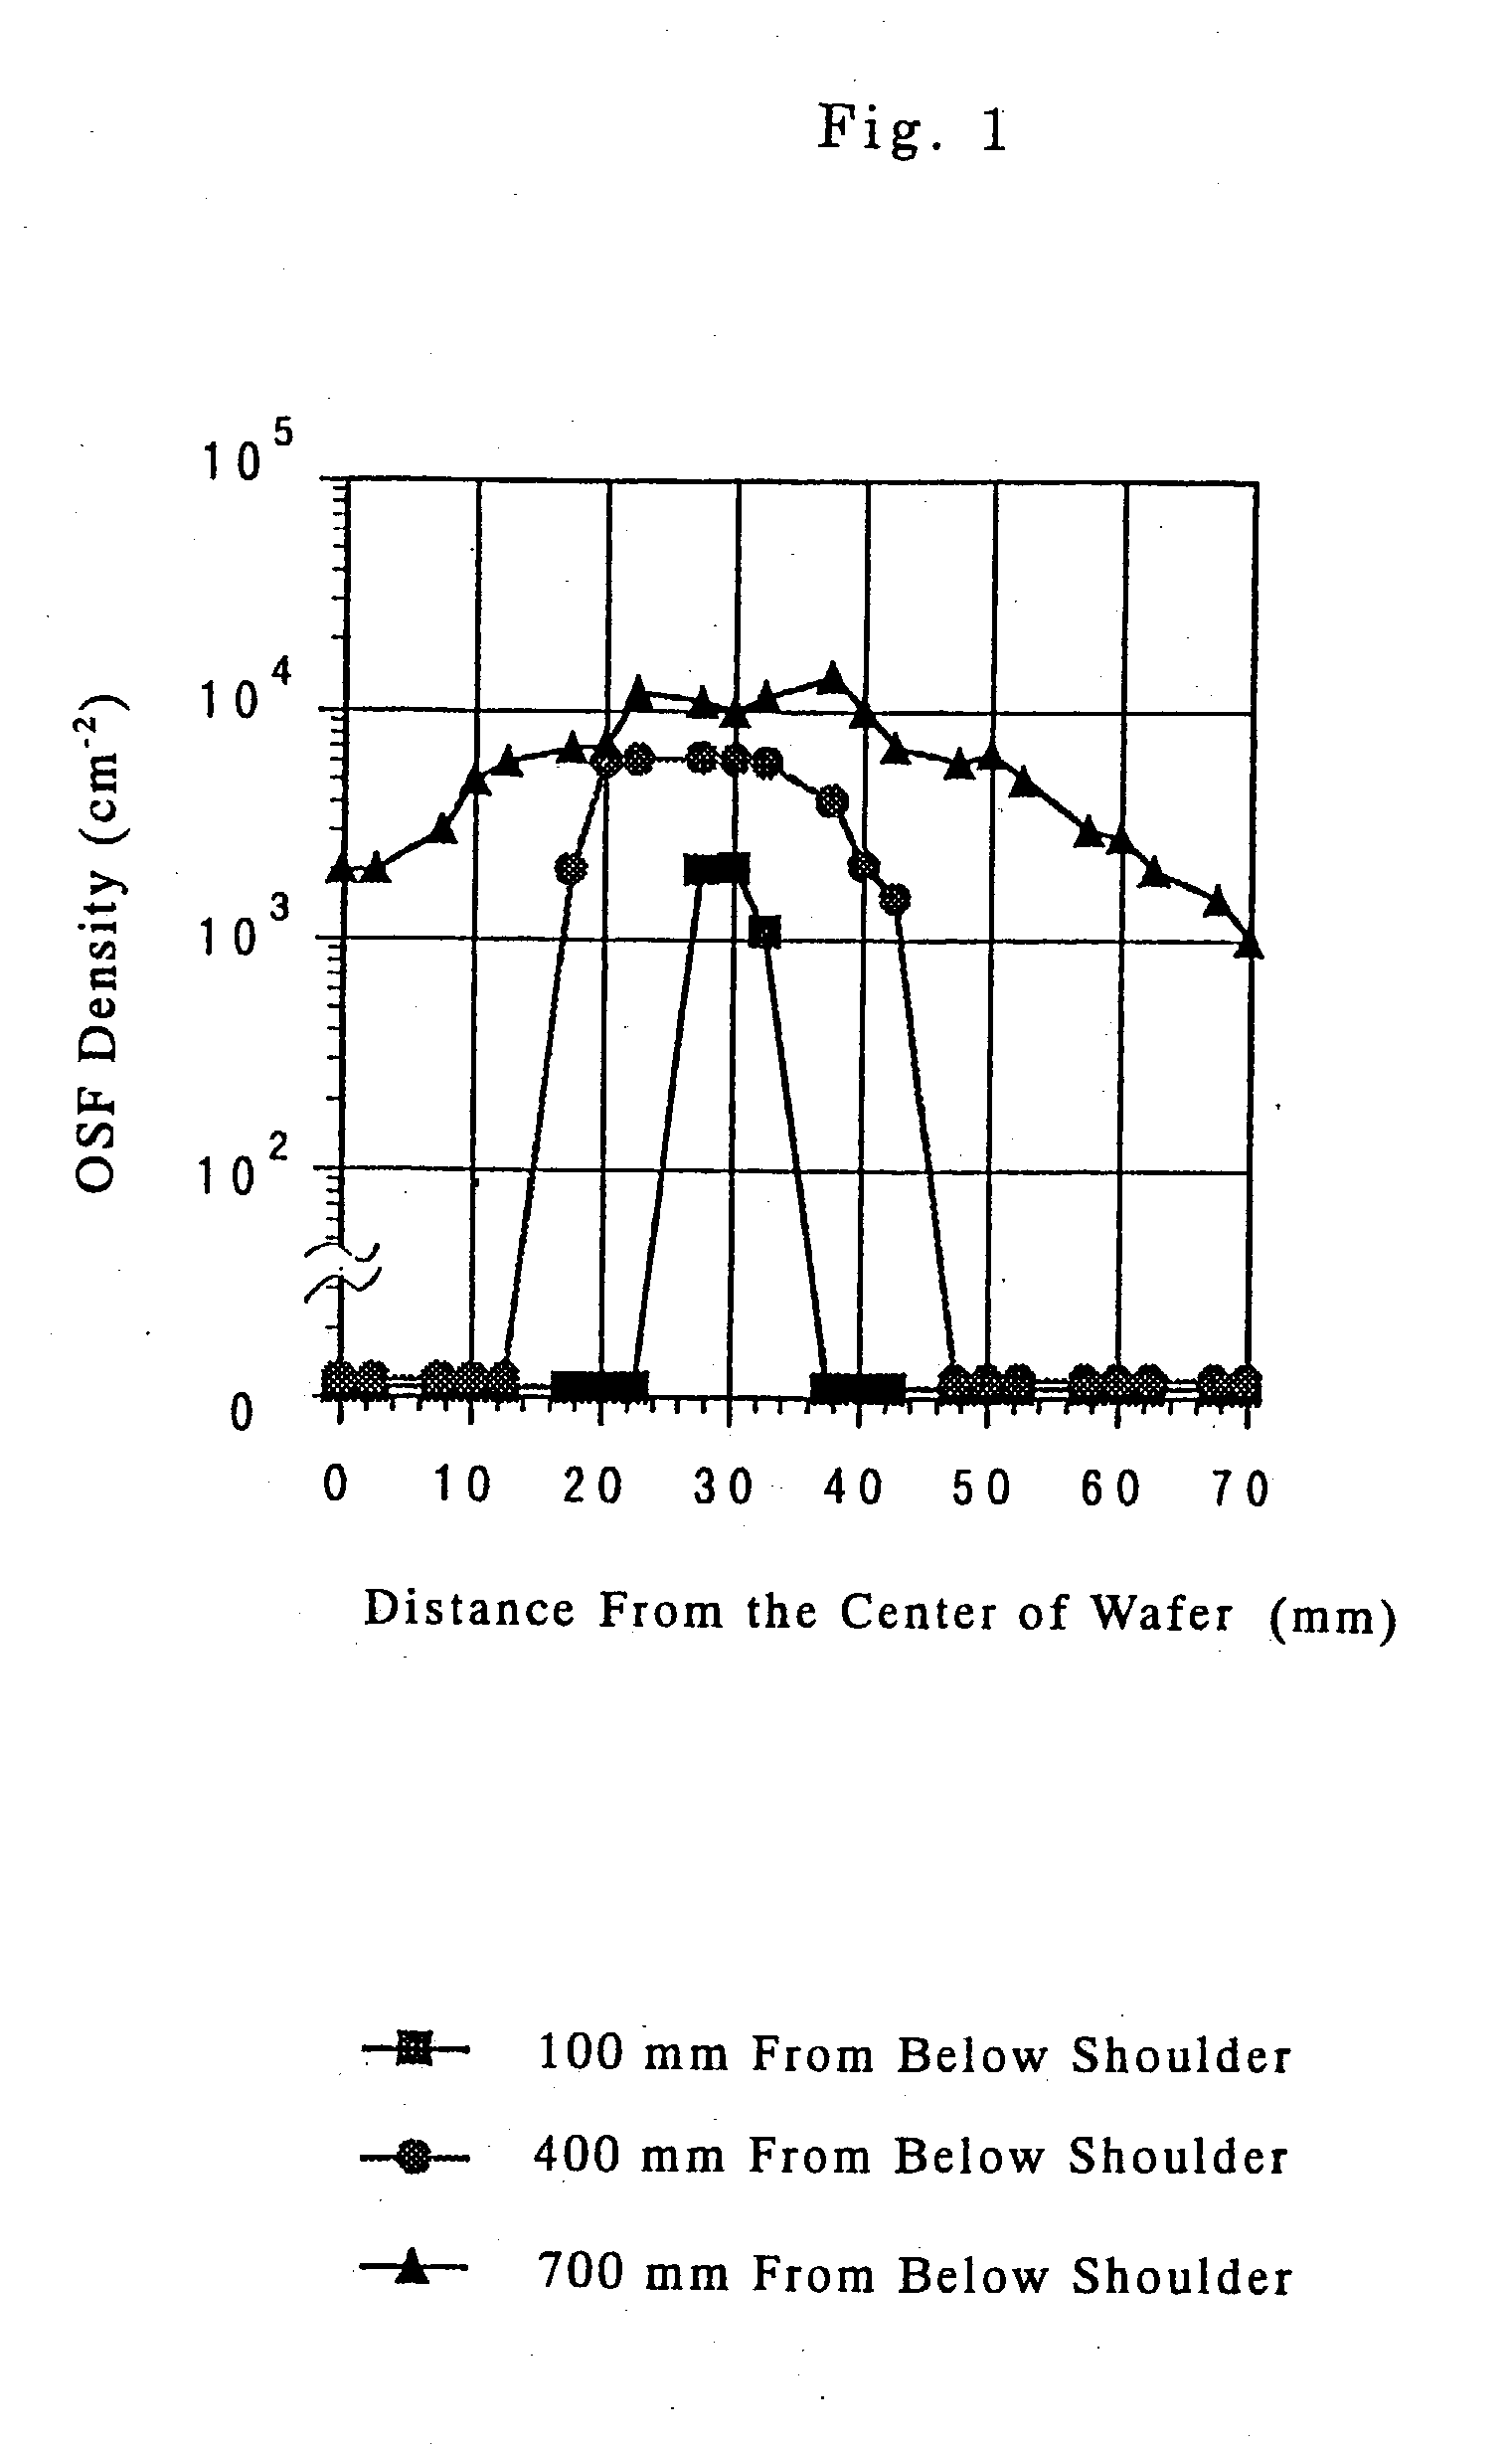 Silicon single crystal, silicon wafer, and epitaxial wafer